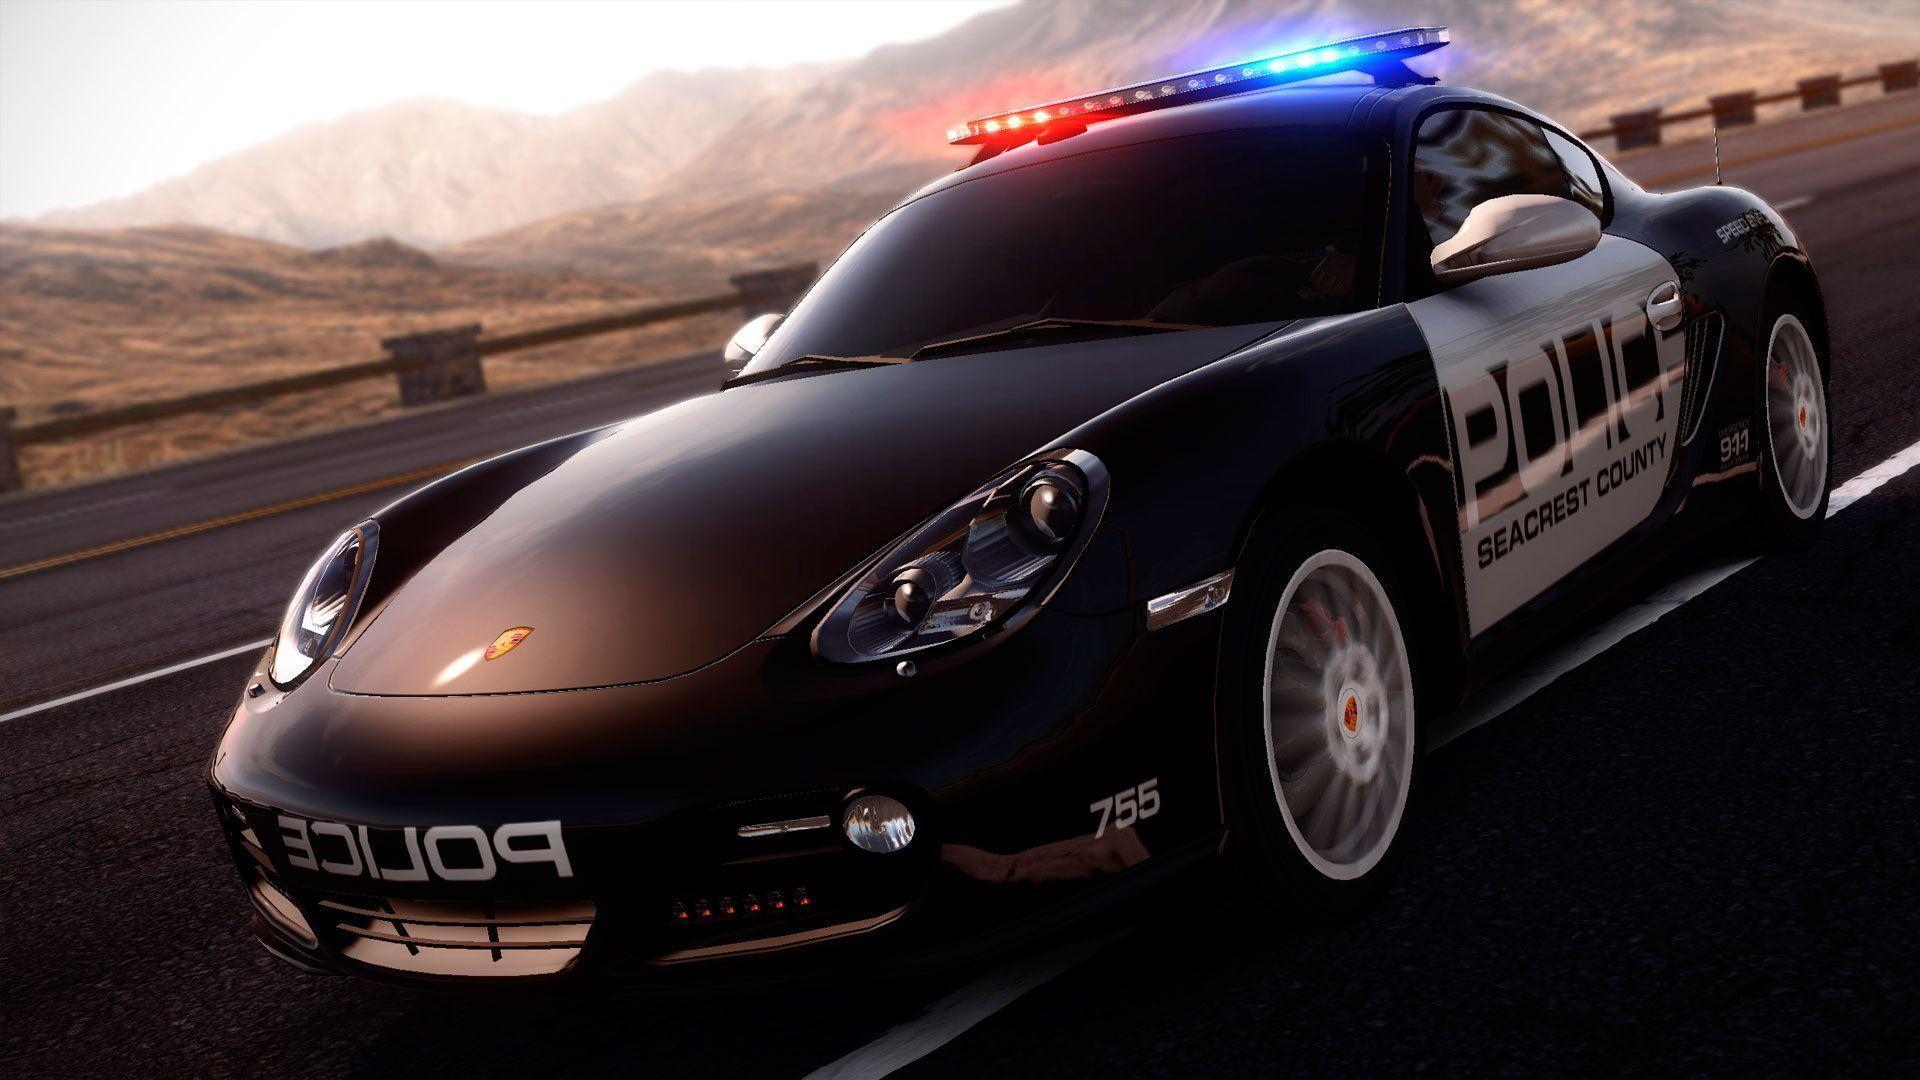 Picture Police Car Wallpaper for Windows 8, Image